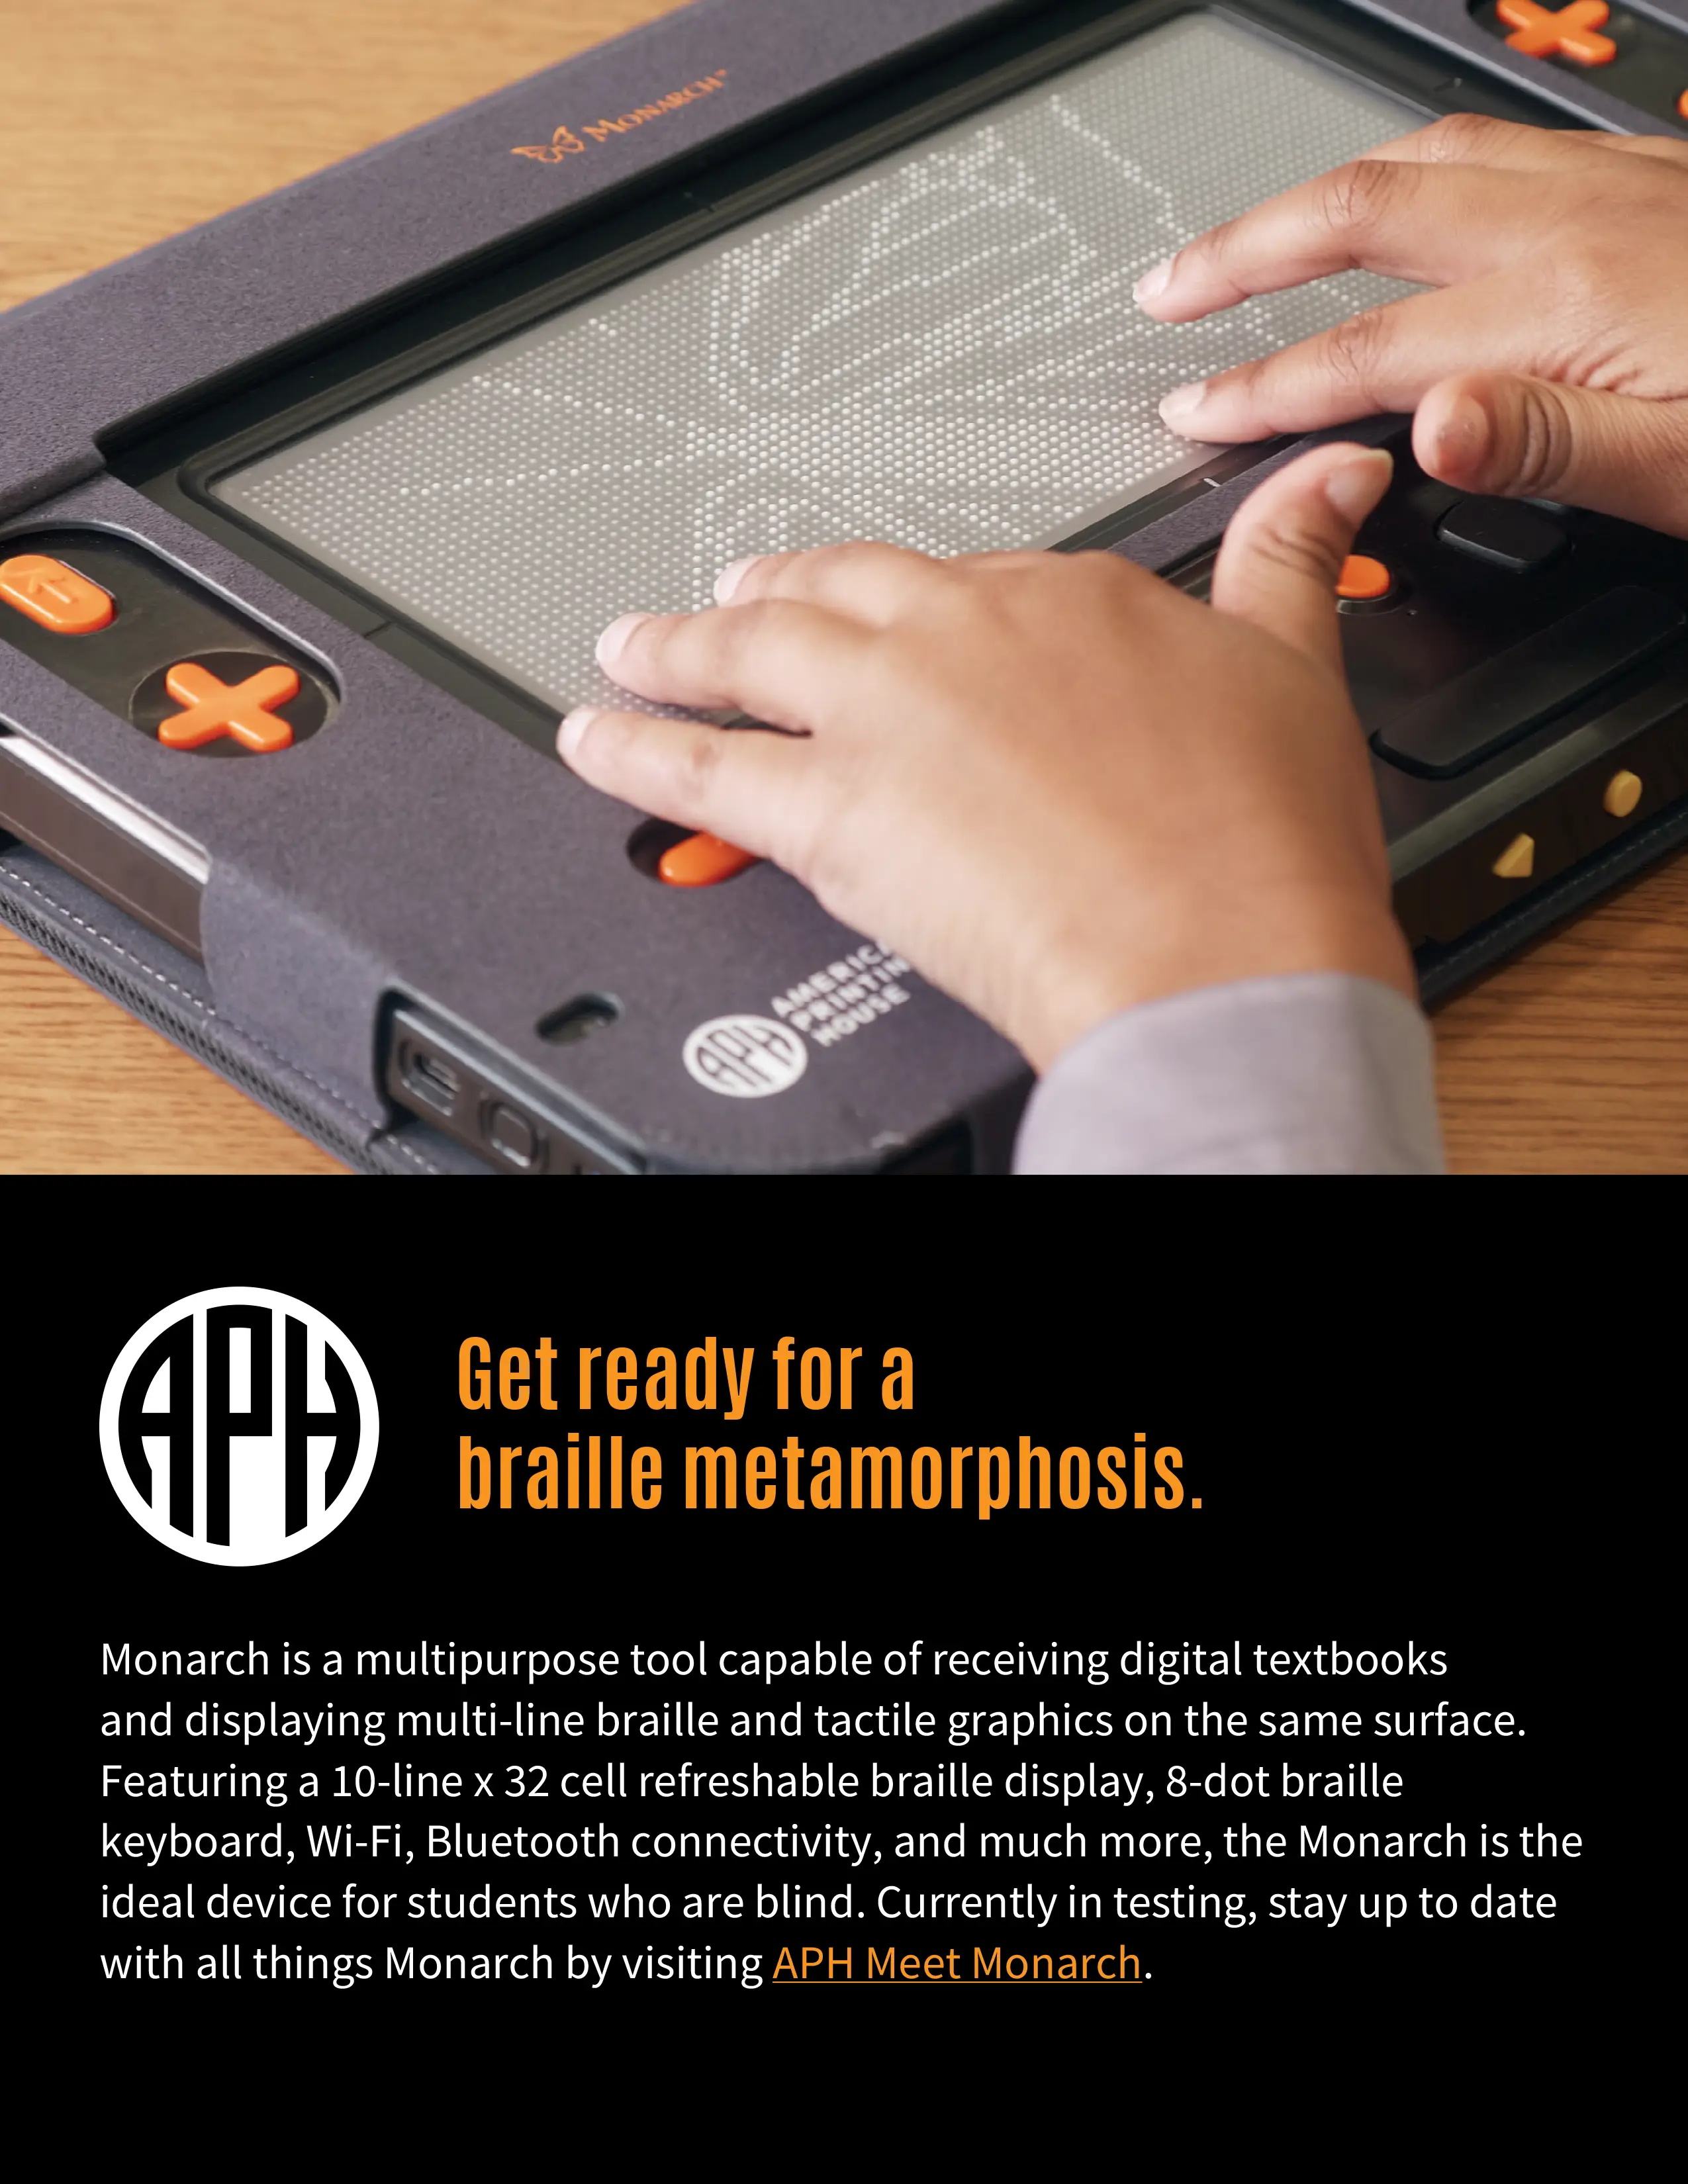 Ad shows APH logo with title: Get ready for a braille metamorphisis and photo of younger student's hands on the Monarch tool displaying a monarch butterfly. Monaarch is a multipurpose tool capable of receiving digital textbooks and displaying multi-line braille and tactile graphics on the same surface. Featuring a 10-line x 32 cell refreshable braille display, 8-dot braille keyboard, Wi-fi, Bluetooth connectivity, and more, the Monarch is the ideal device for students who are blind. Currently in testing, stay up to date with all things Monarch by visiting APH Meet Monarch